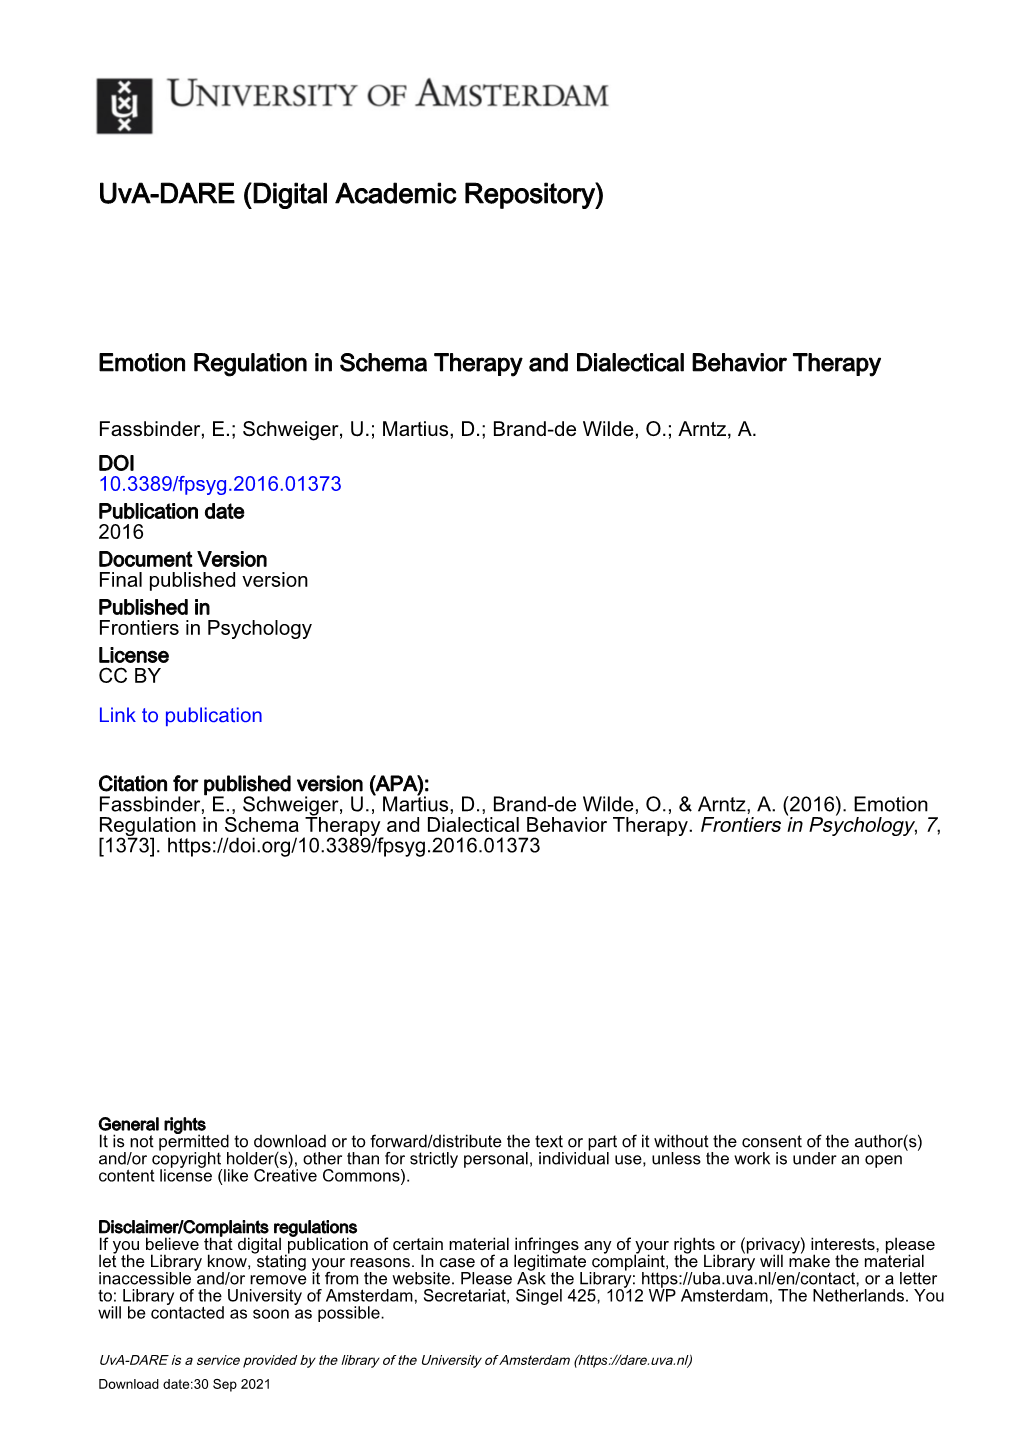 Emotion Regulation in Schema Therapy and Dialectical Behavior Therapy